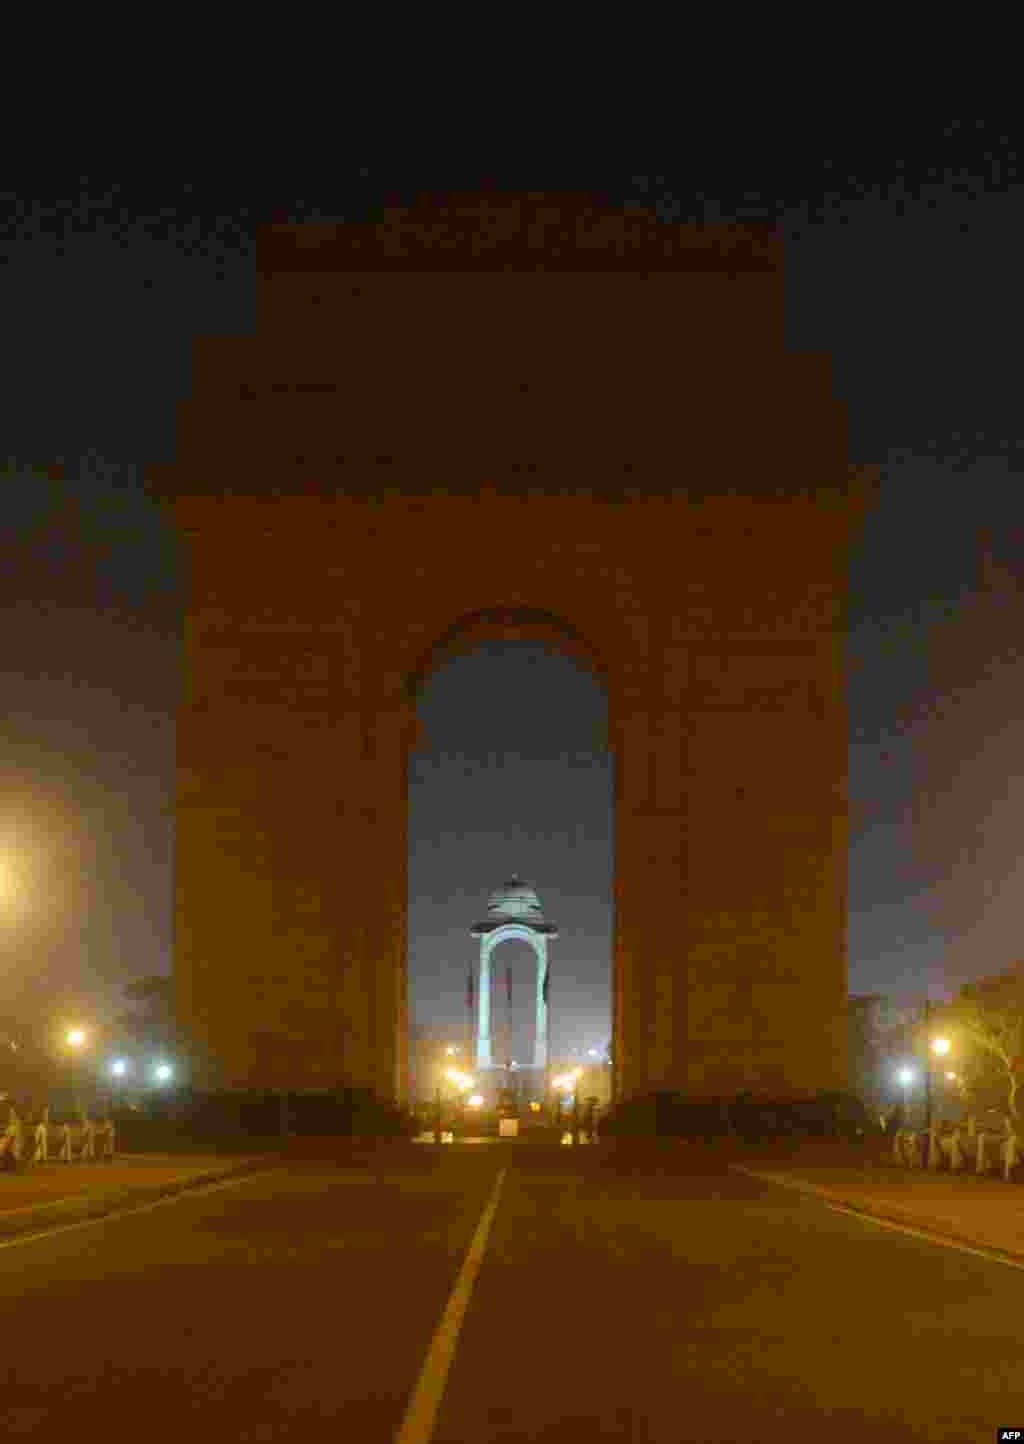 Indian police look on at India Gate monument, with lights switched off during an Earth Hour event in New Delhi.